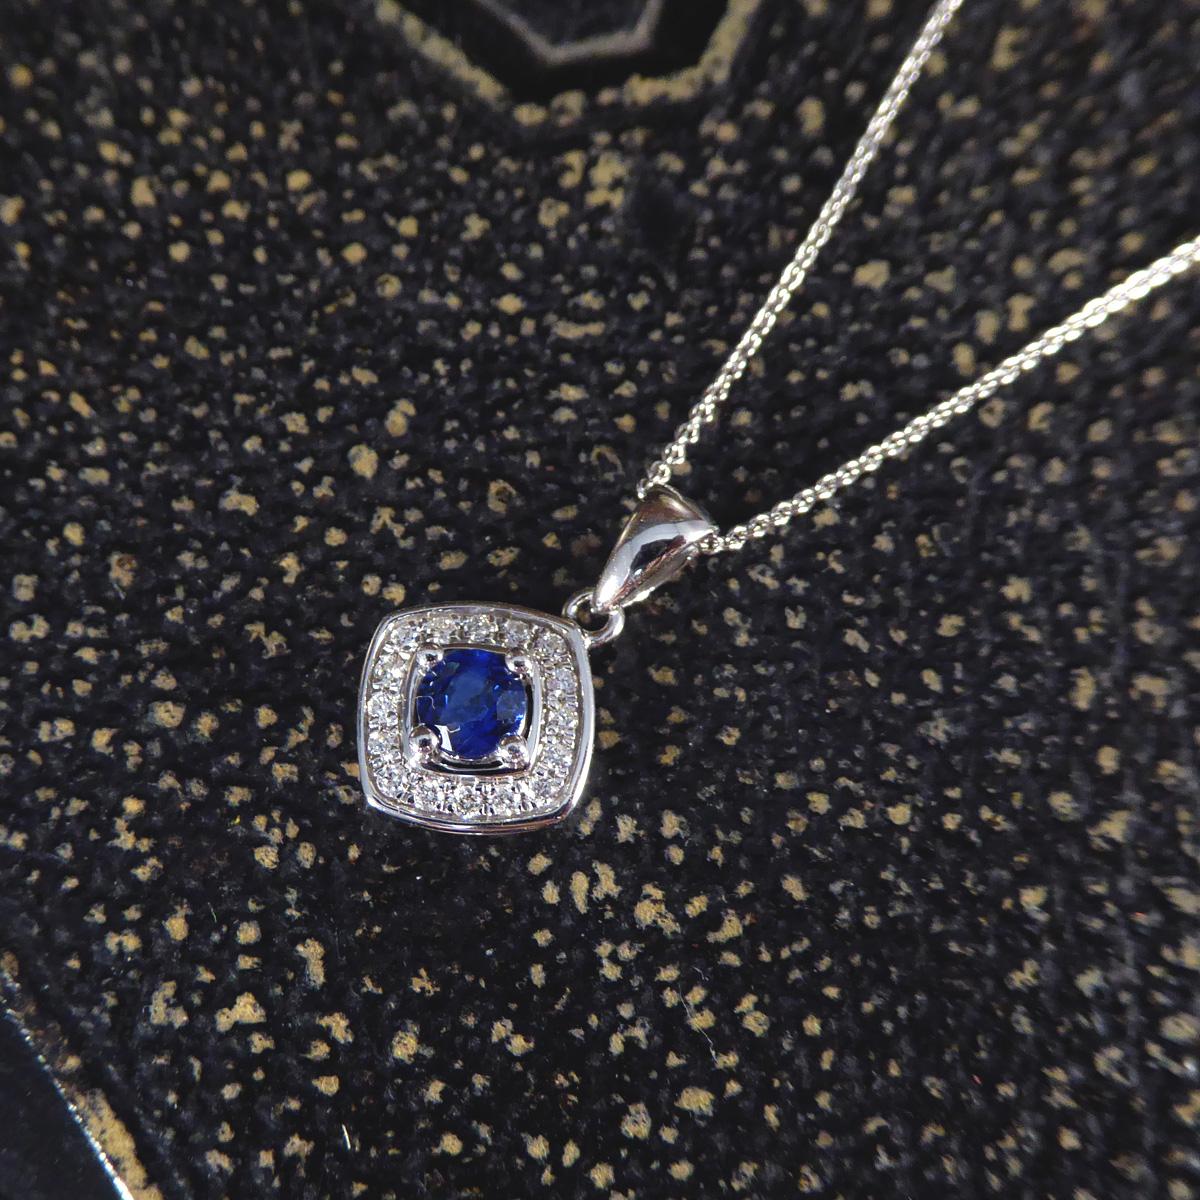 This necklace features a stunning Ceylon sapphire at its heart, renowned for its vibrant, deep blue hue that captures the essence of the exotic landscapes of Sri Lanka. The sapphire is beautifully encircled by a halo of glittering diamonds, each one